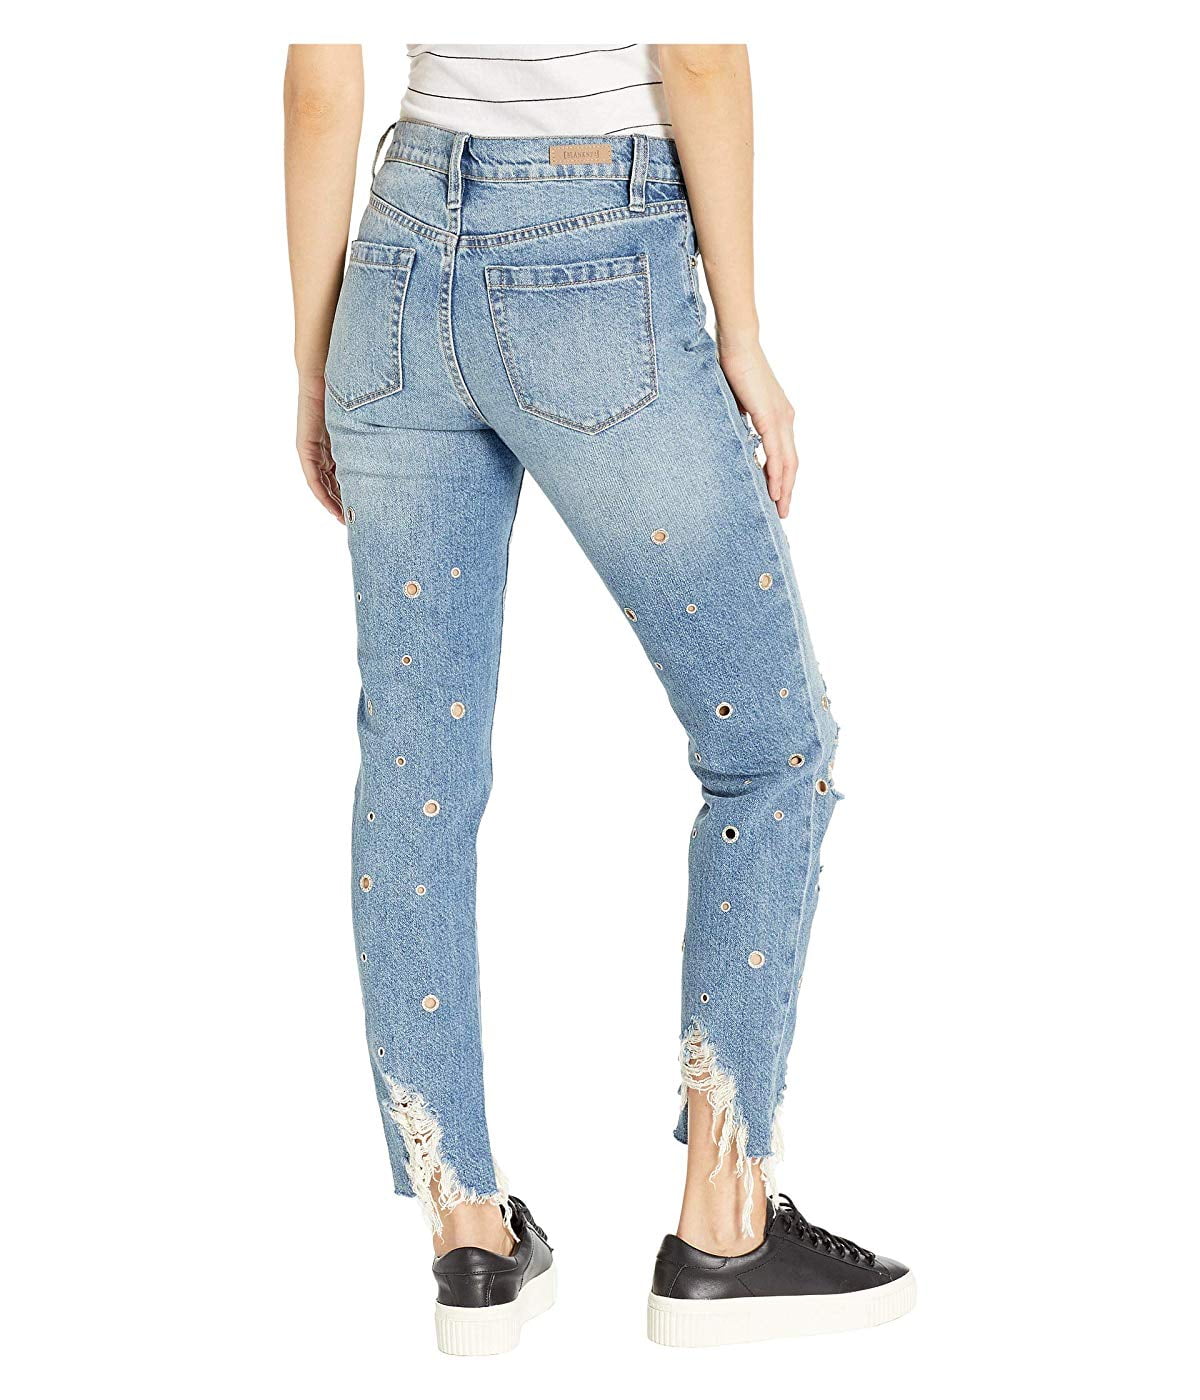 distressed jeans front and back